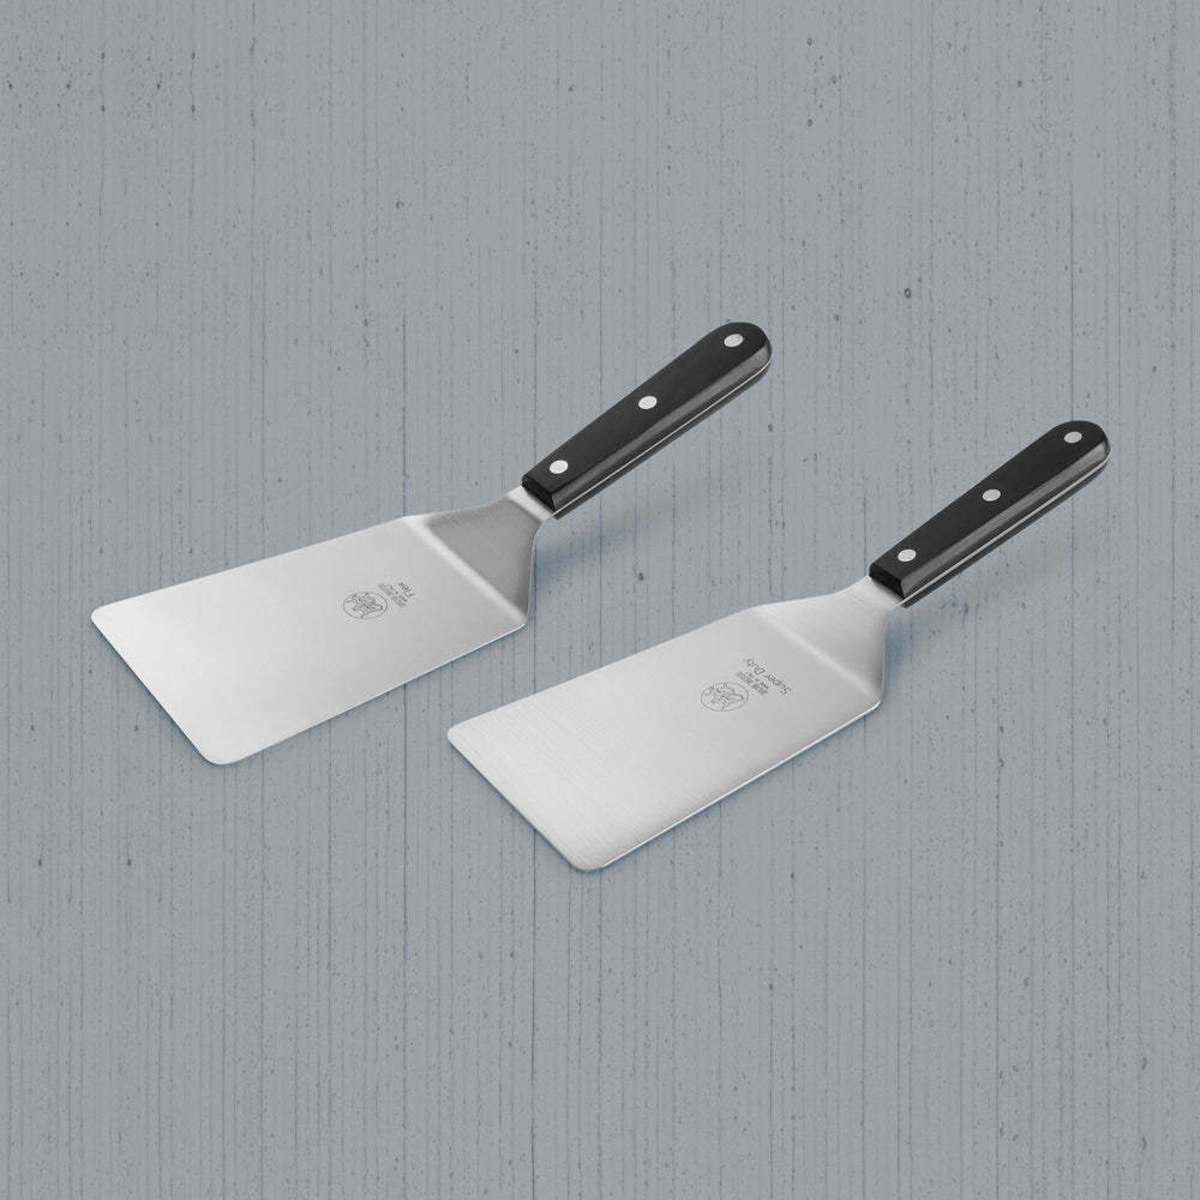 The long handled Steel Spatula is a ideal tool for any kitchen to turn and serve food like burgers, steaks and even home fries it worked well for flipping over a cheese steak.